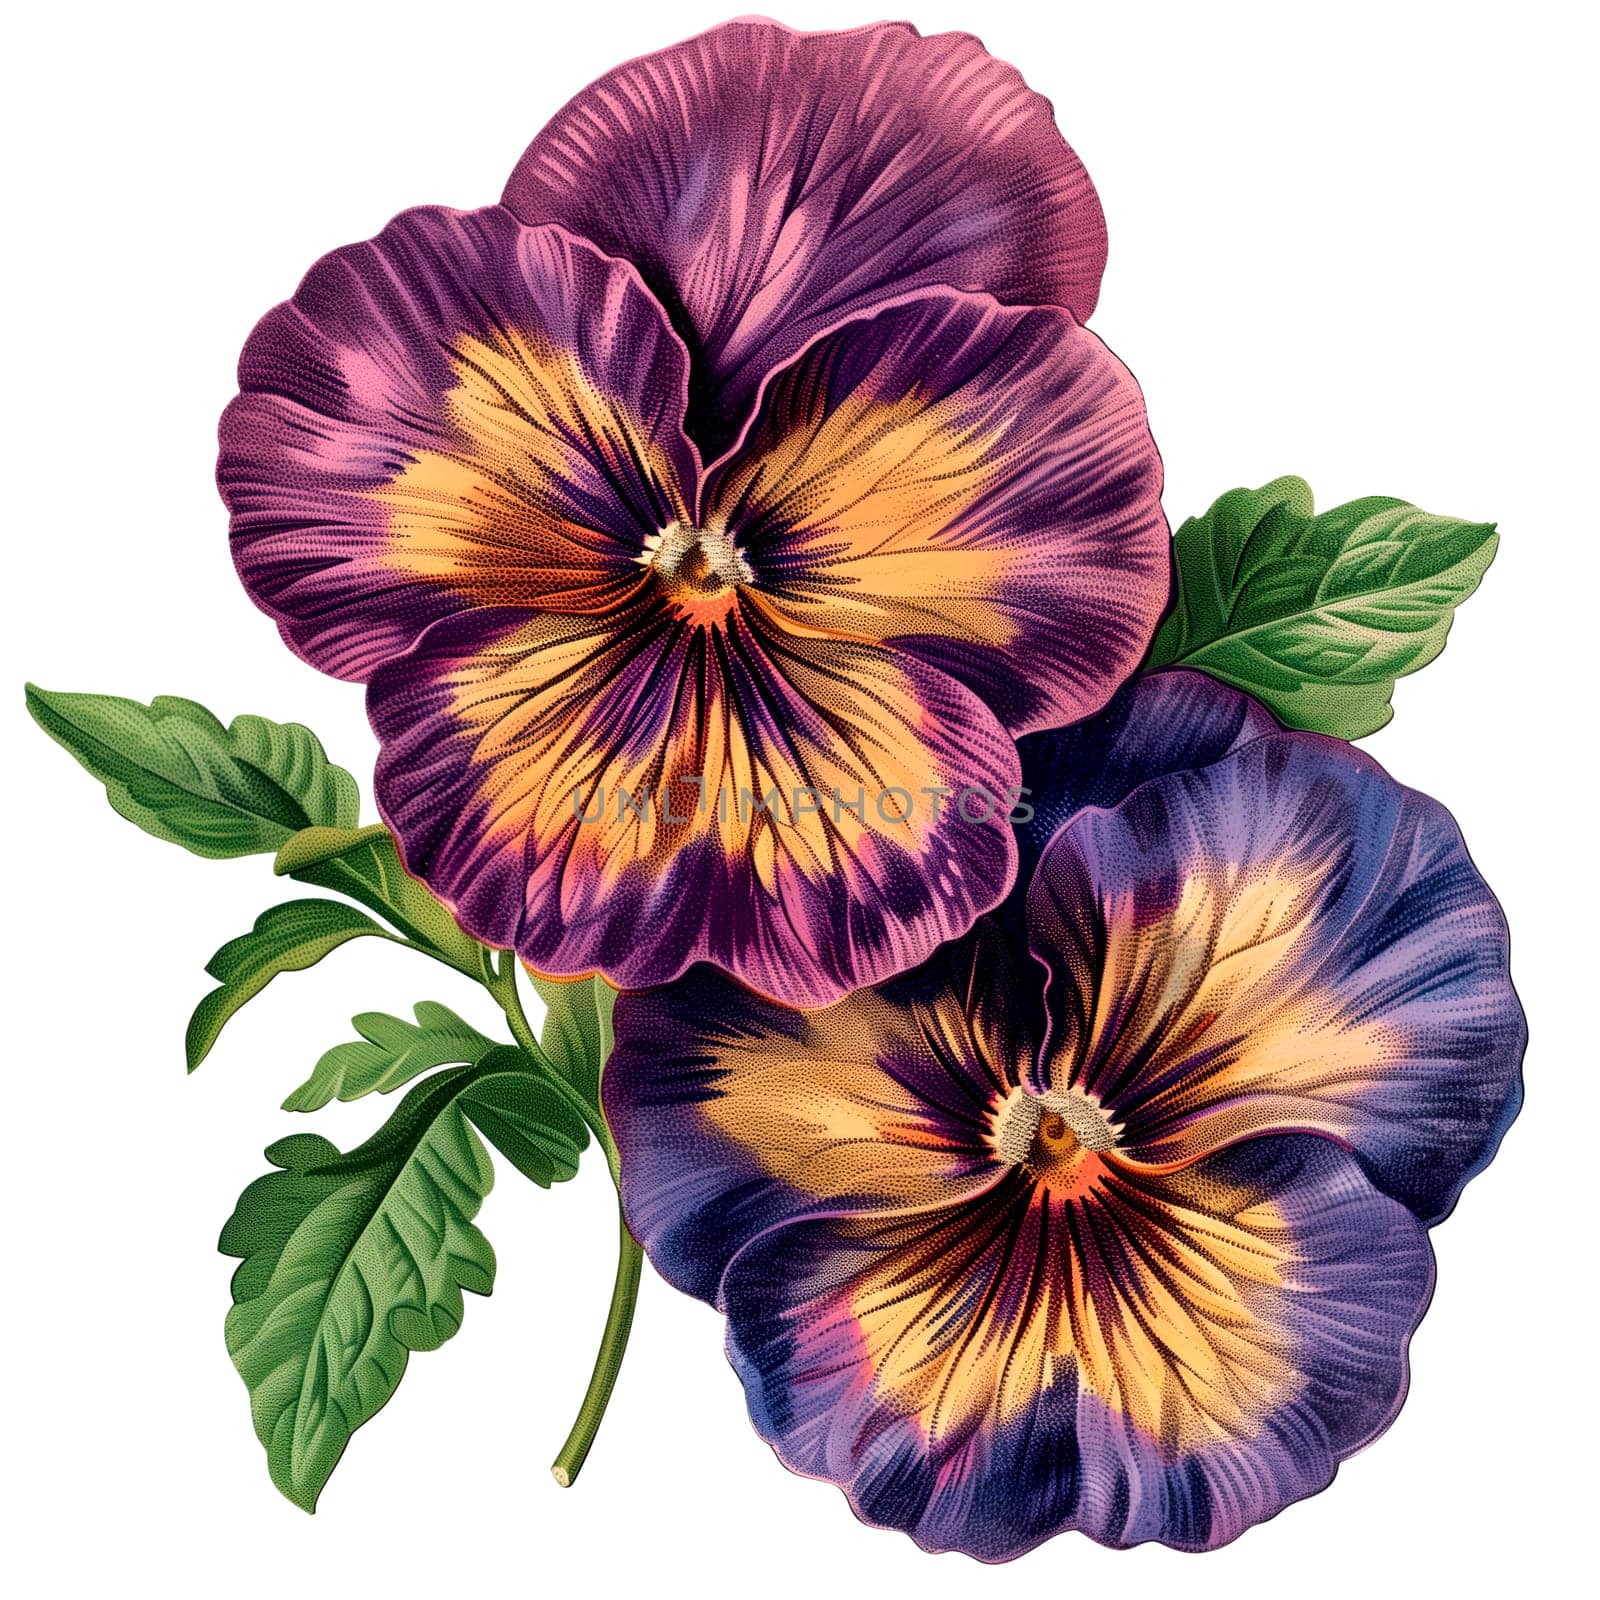 Isolated illustration of colorful pansy flower by Dustick